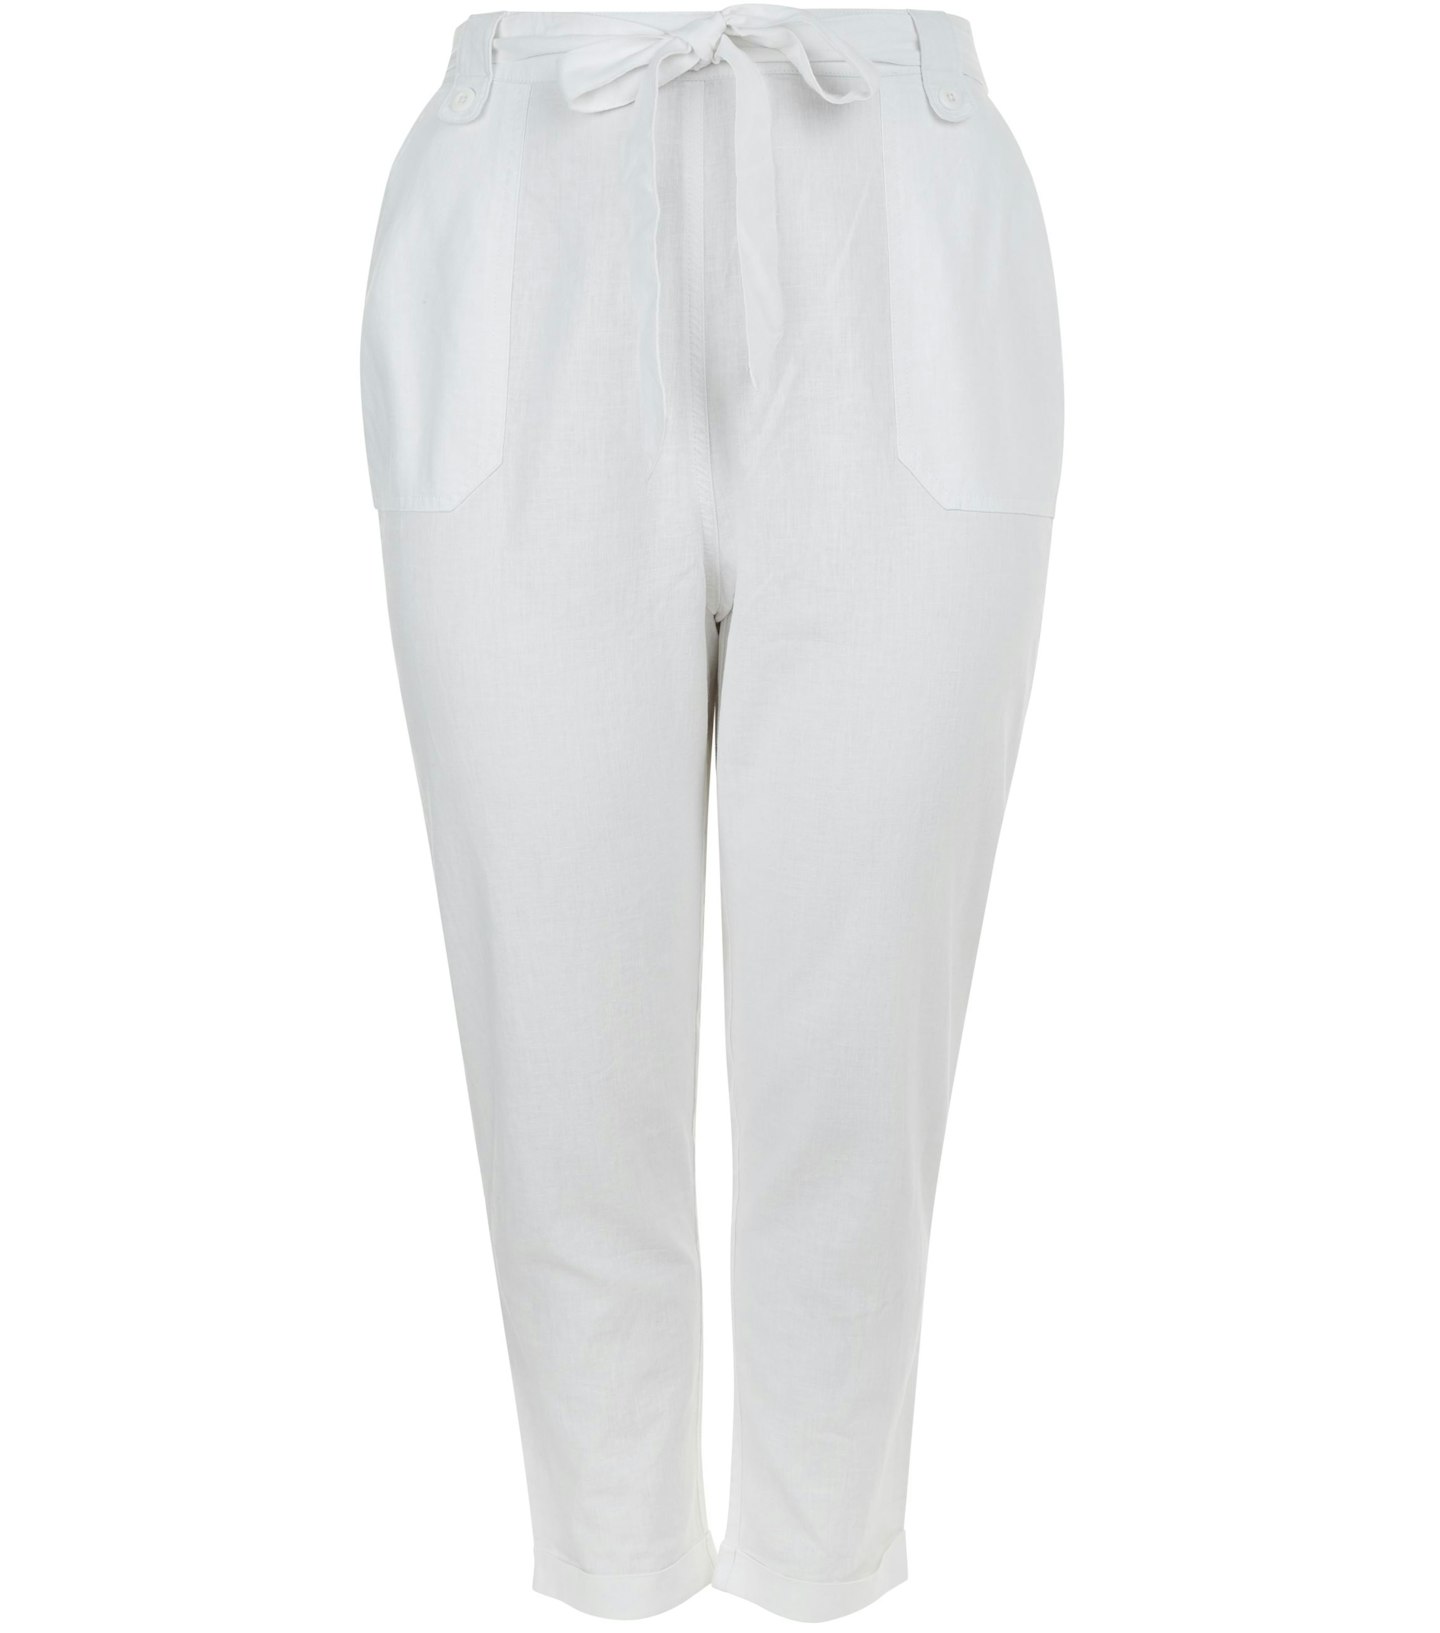 White trousers £19.99